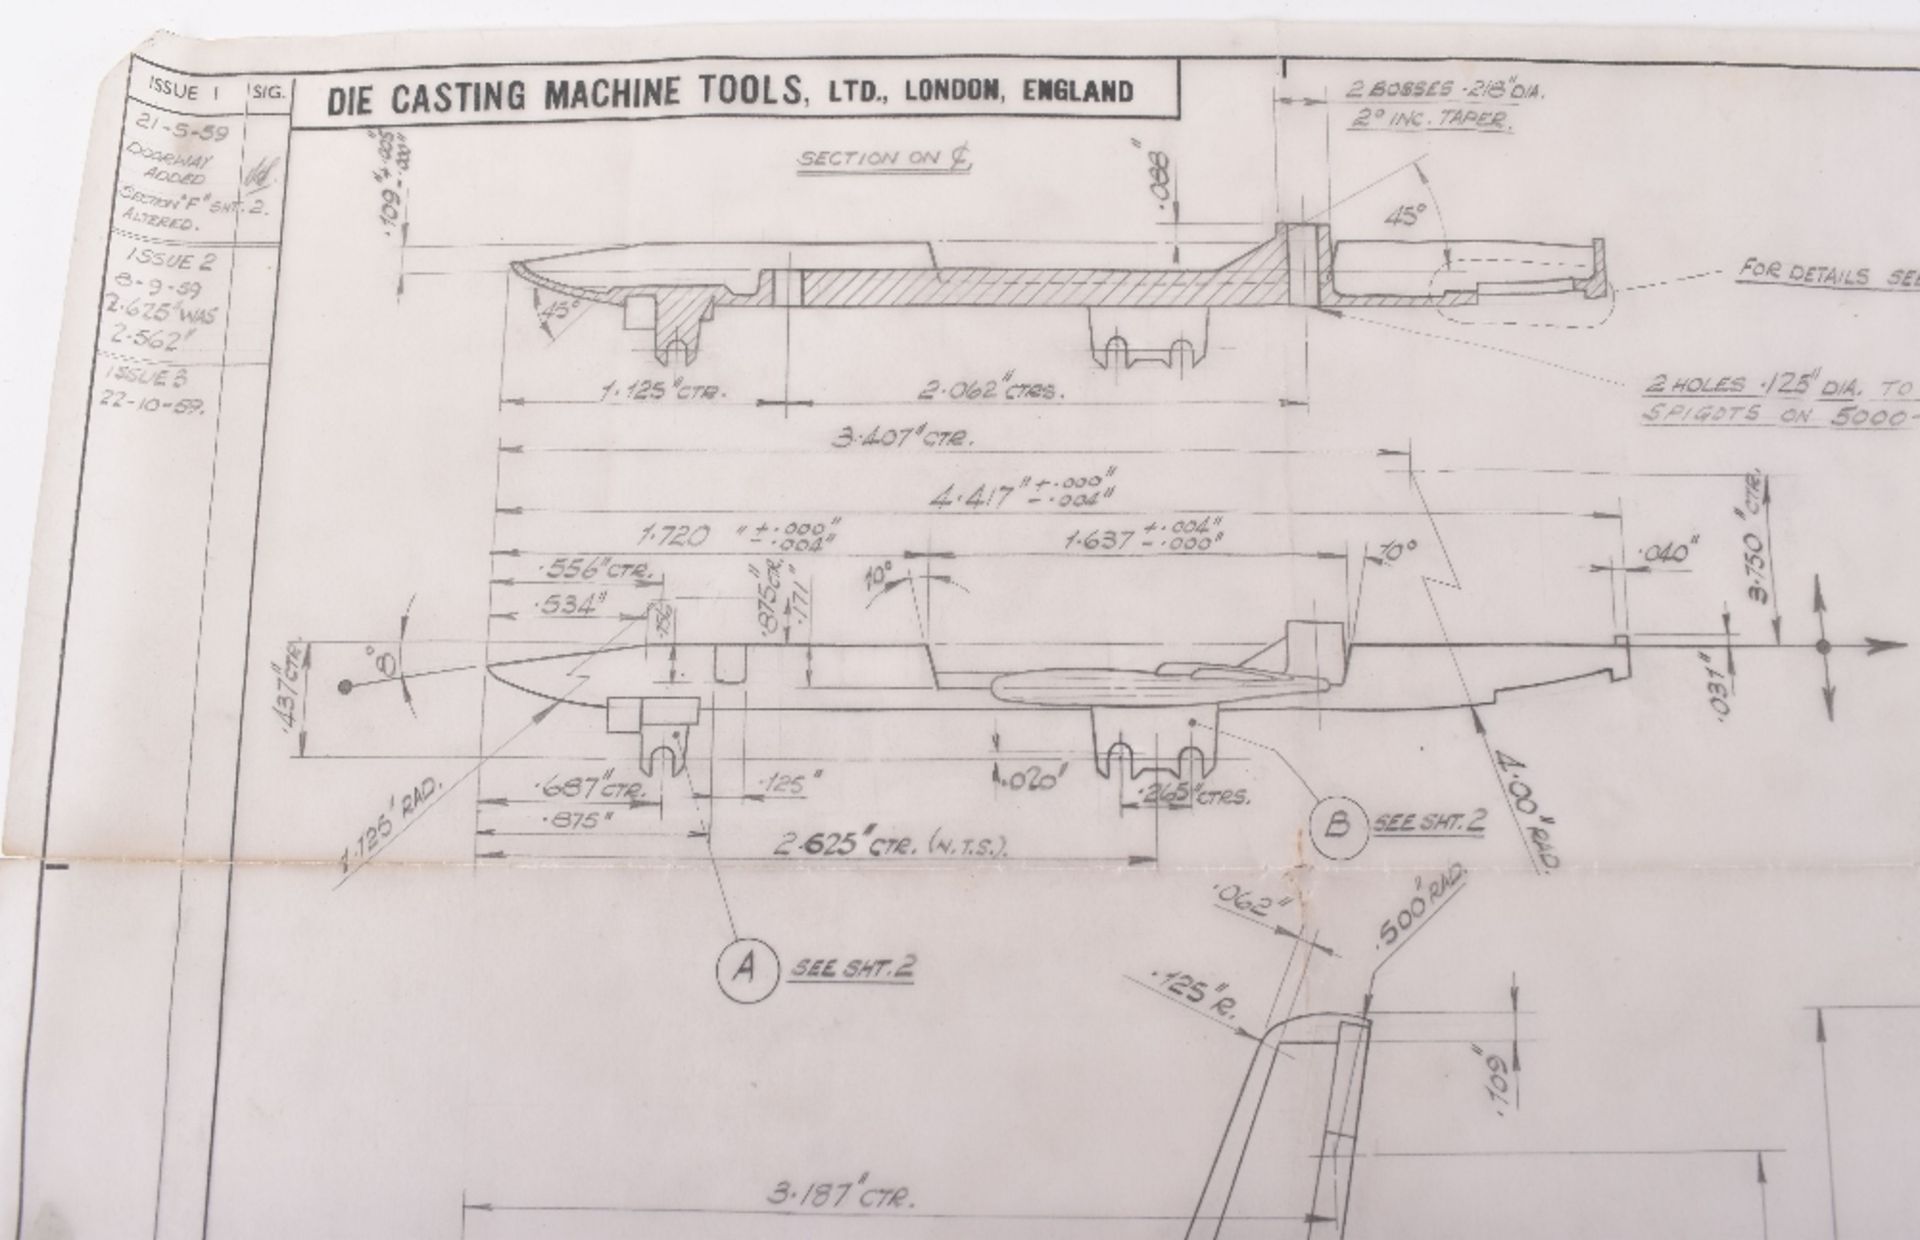 Original Die casting machine tools (DCMT) Lone Star Drawing - Image 2 of 7